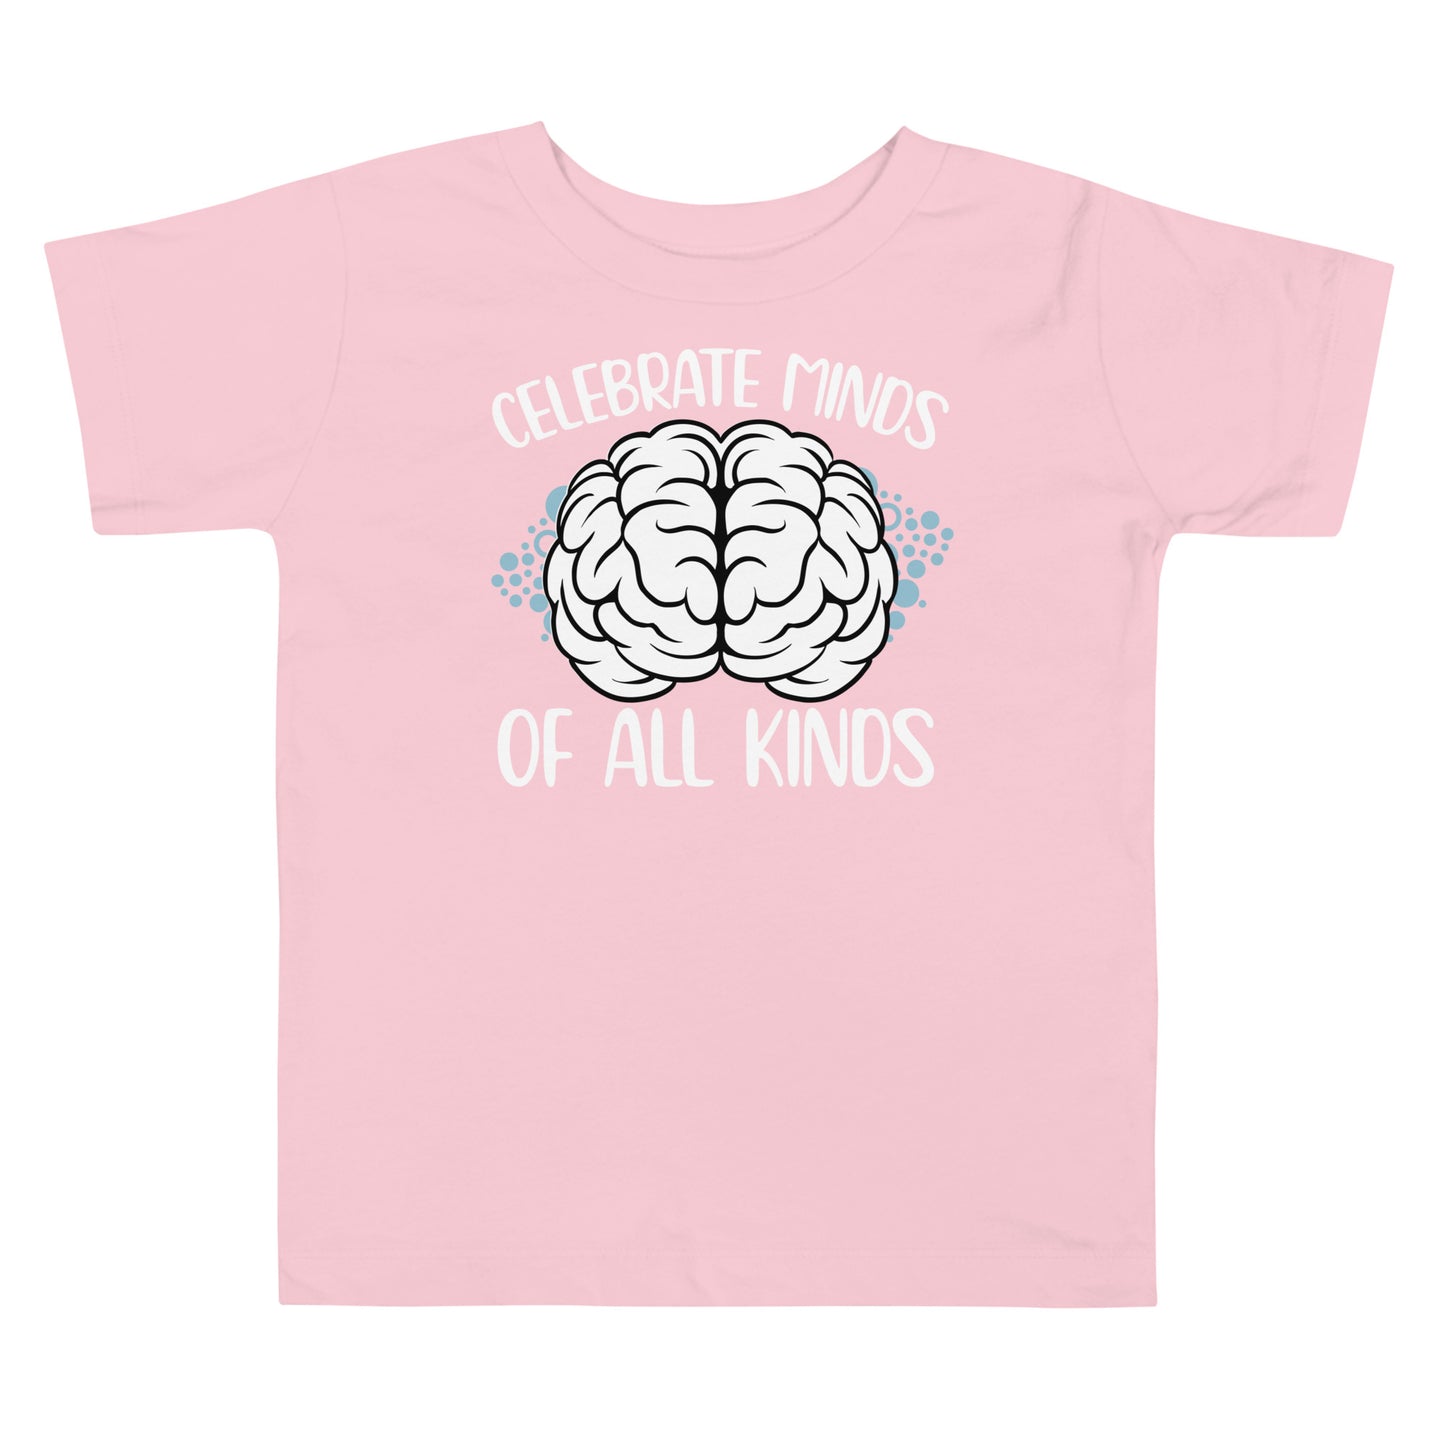 Celebrate Minds of All Kinds Quality Cotton Bella Canvas Toddler T-Shirt